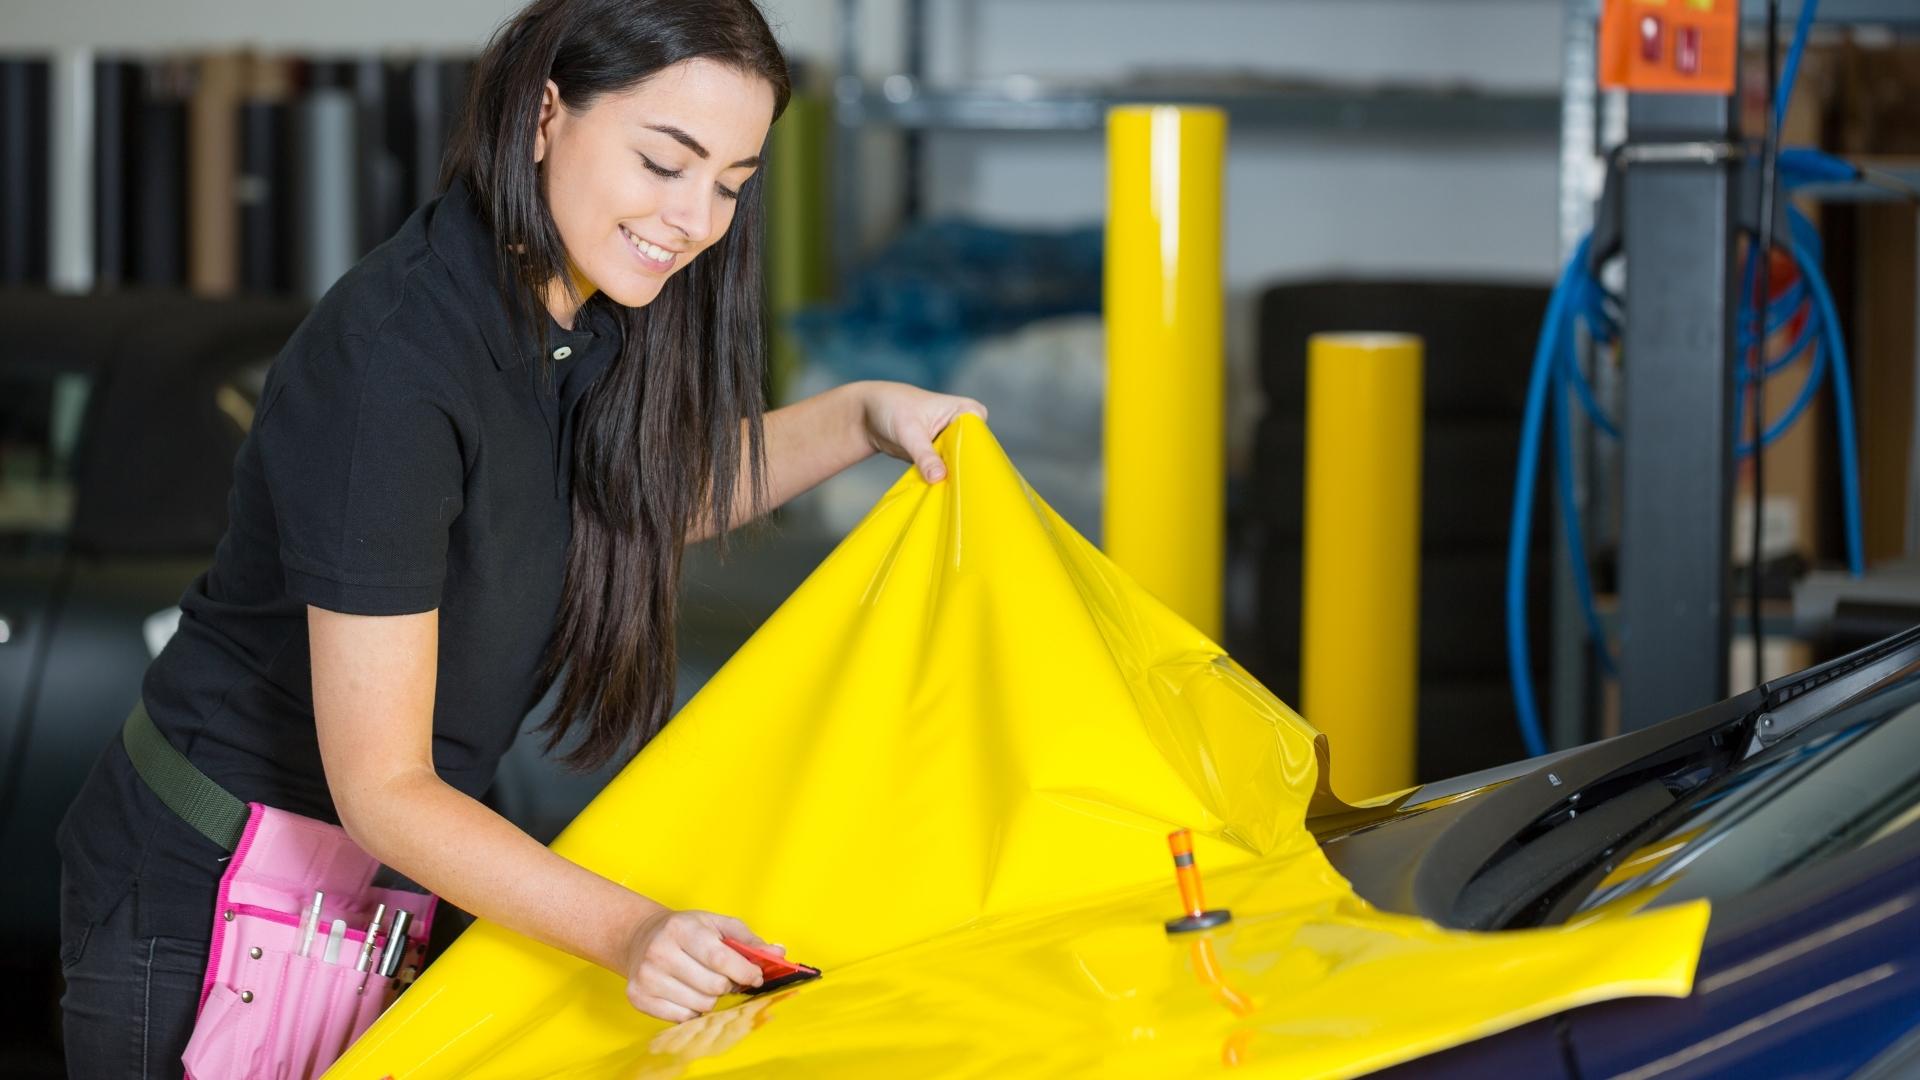 Woman is wrapping vehicle with bright yellow wrap, wrapping process